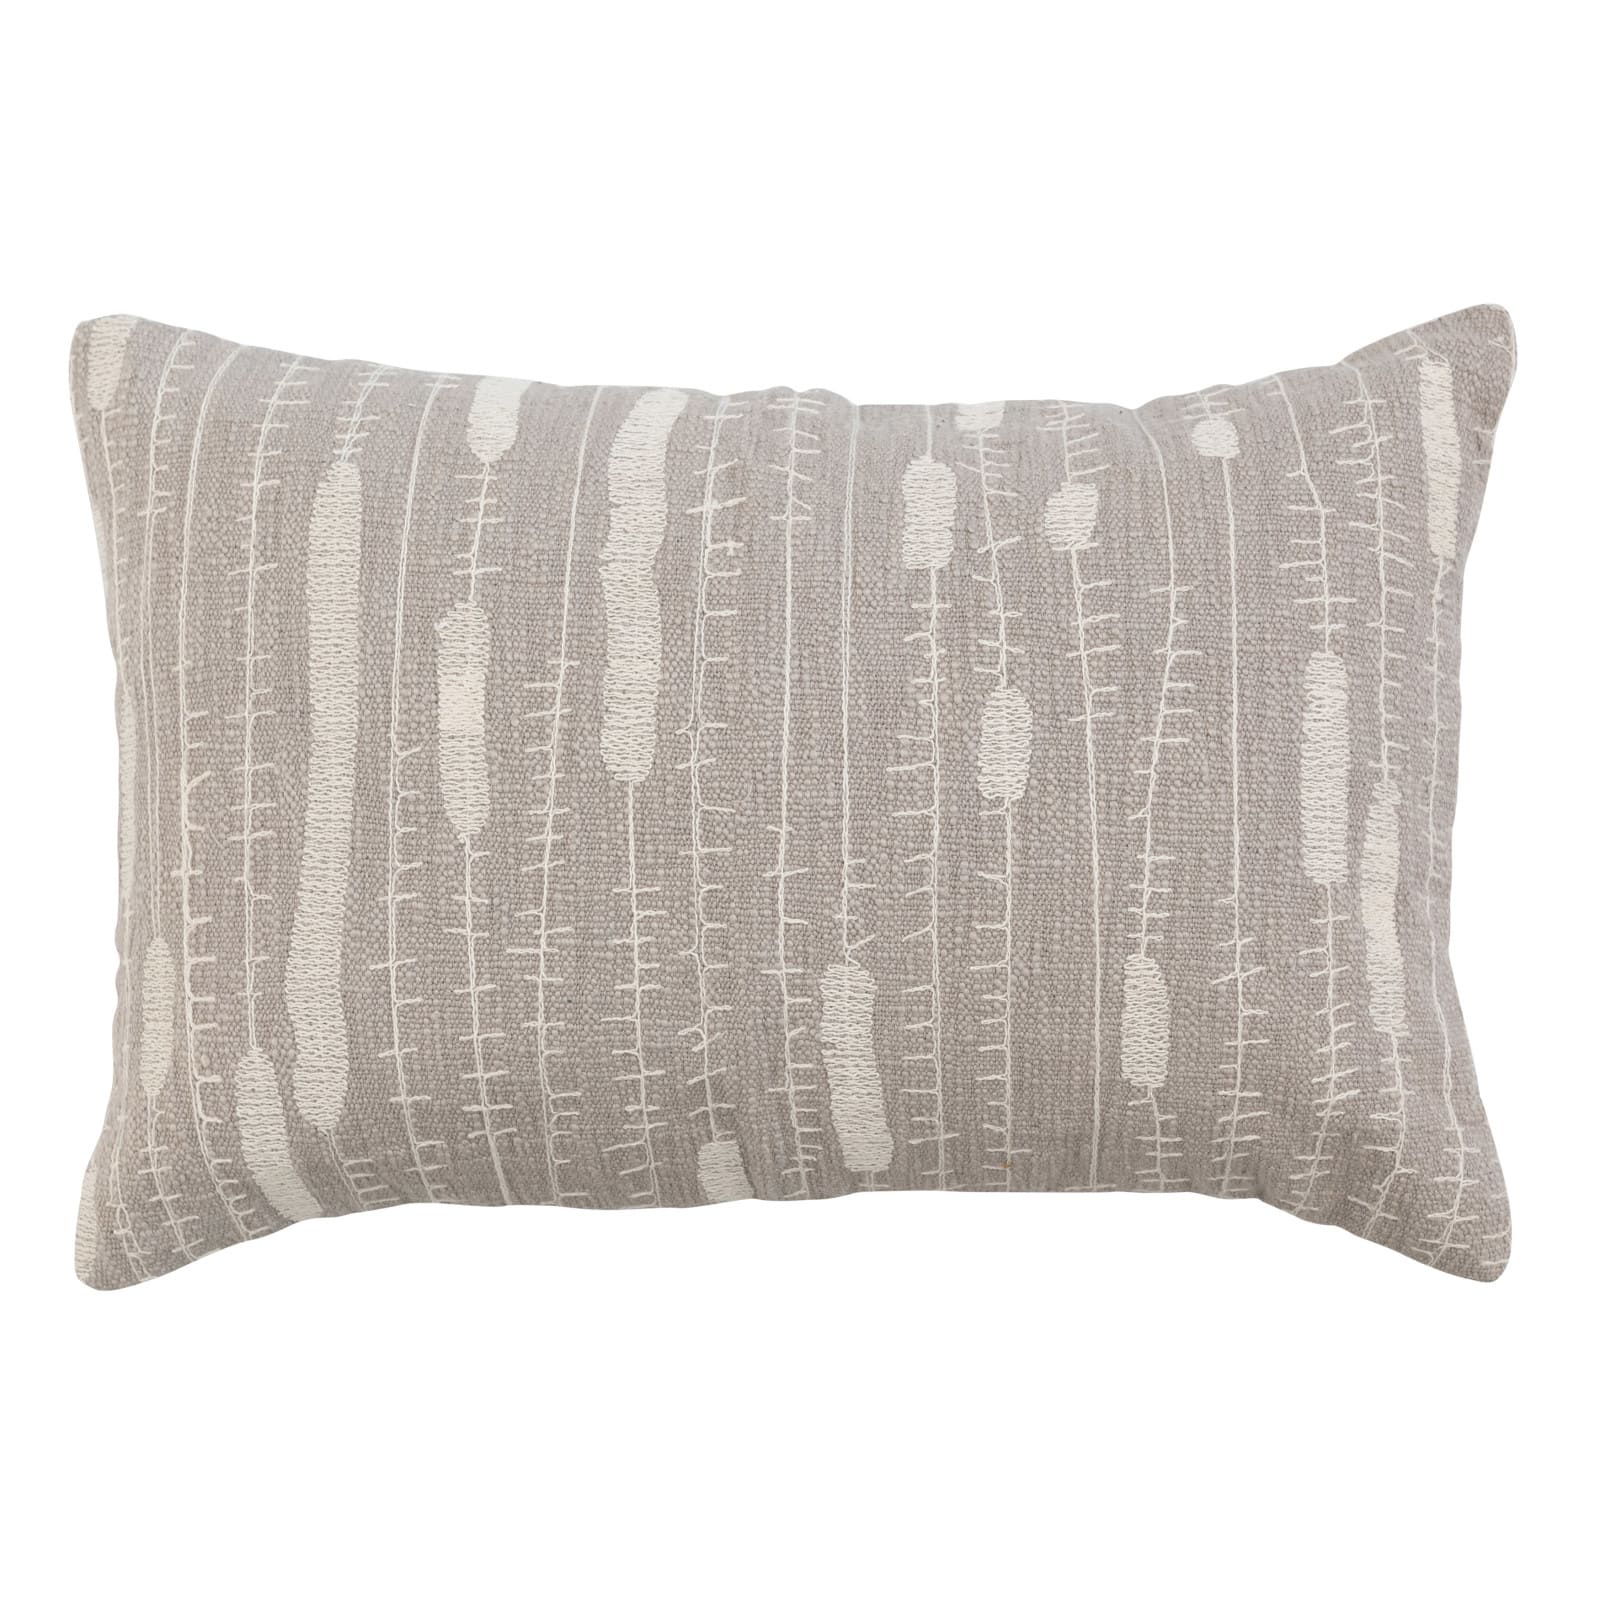 Deerlux 16 Handwoven Cotton Throw Pillow Cover with White Tufted Line Pattern and Tassel Corners with Filler, White